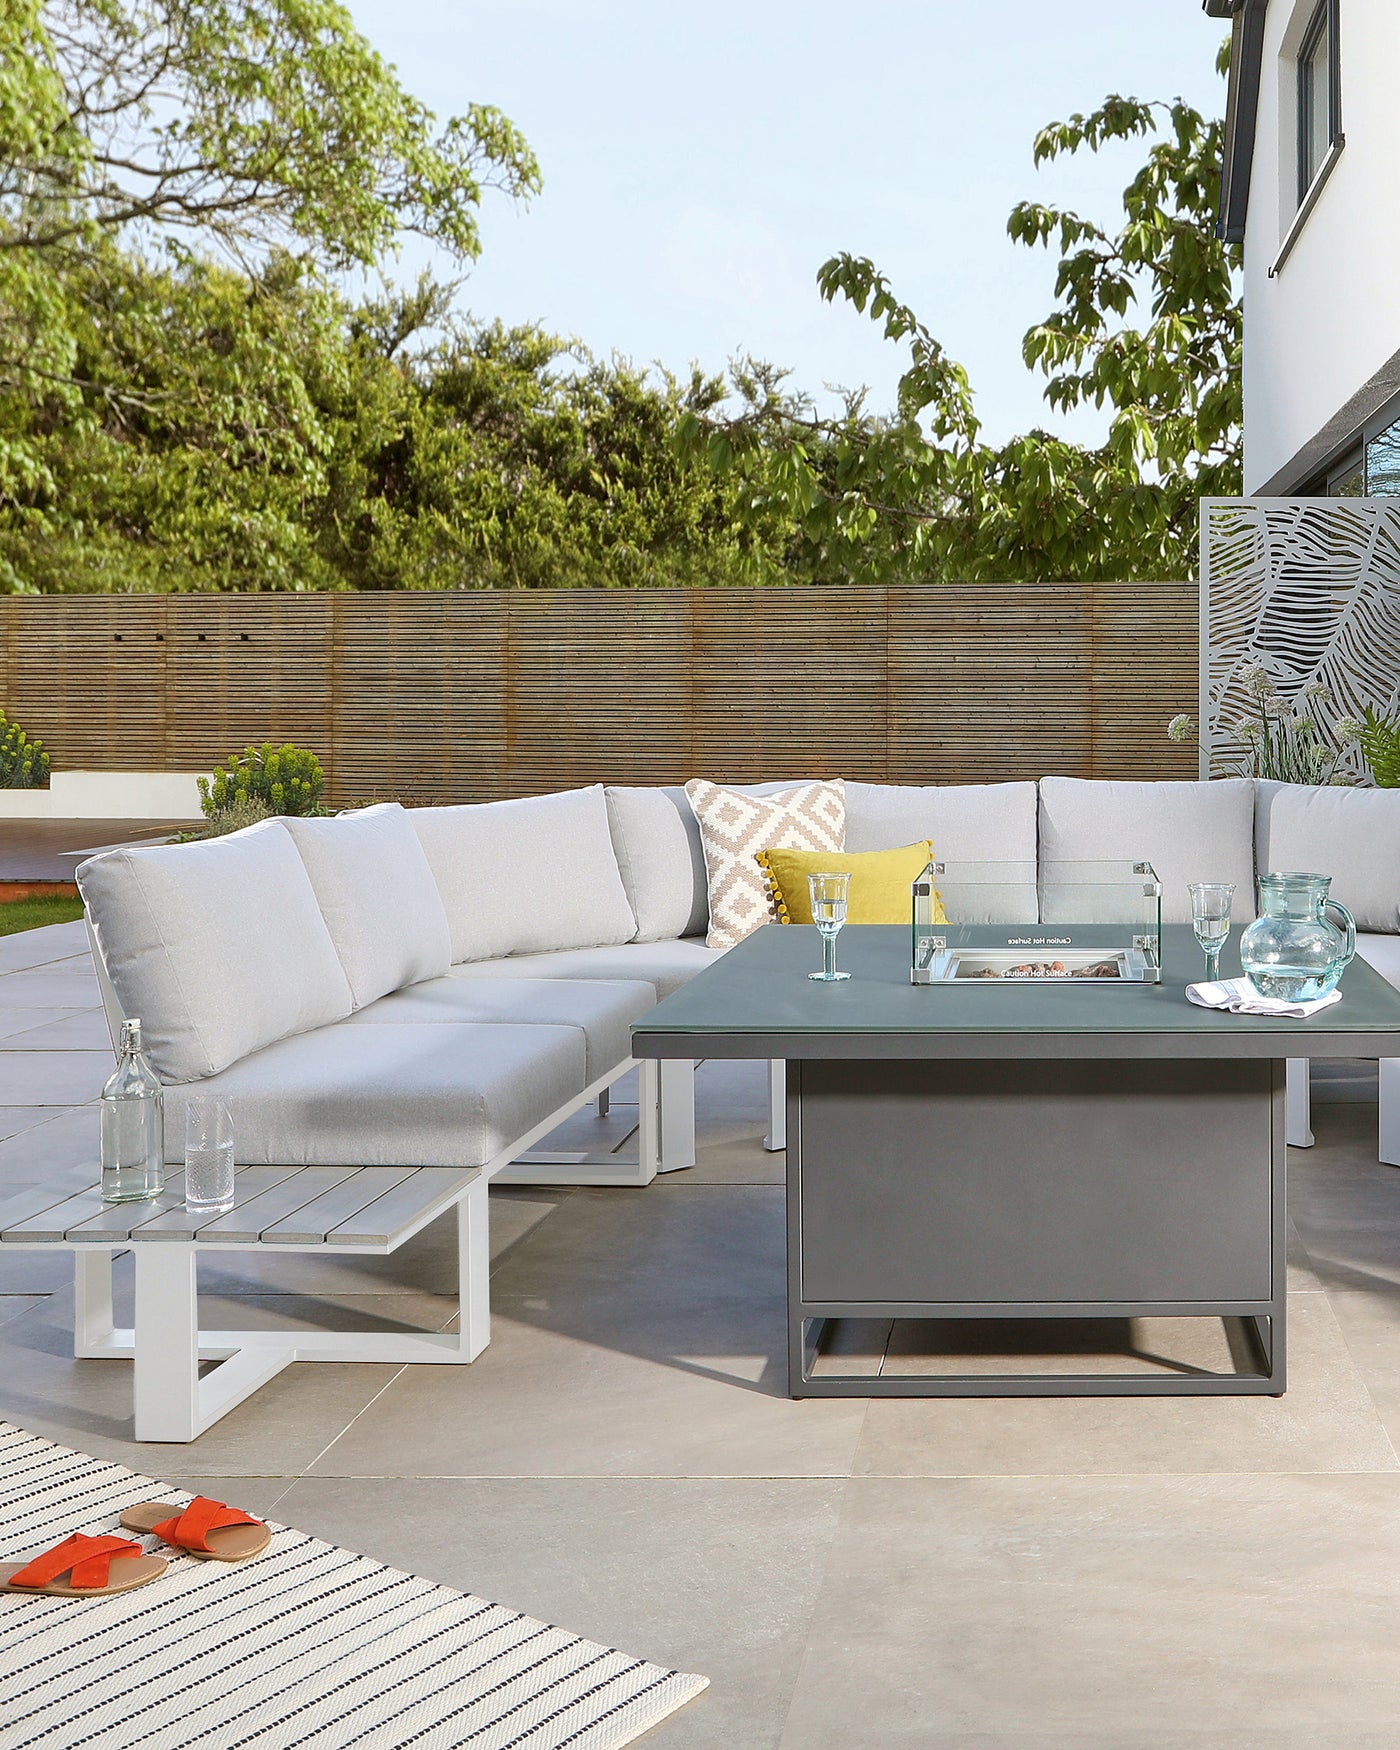 Modern outdoor furniture set featuring a sectional sofa with light grey cushions and a white frame, accompanied by a dark grey square coffee table with a glass top in a patio setting.